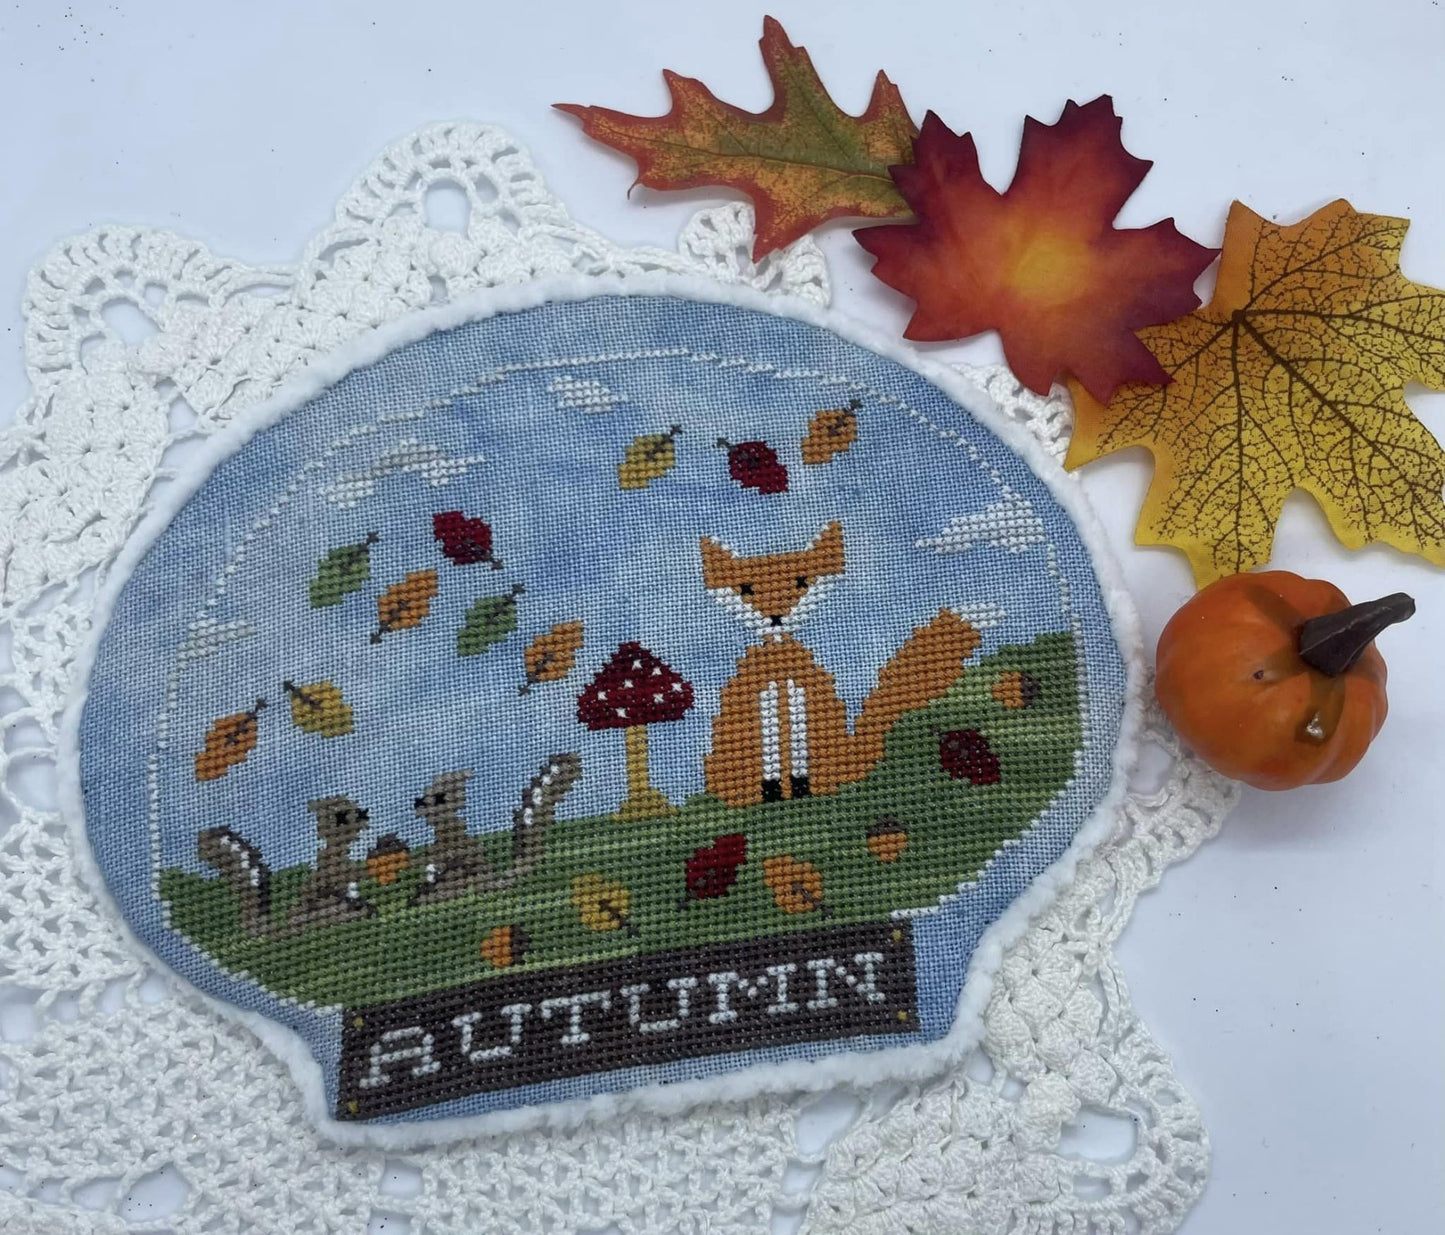 Autumn in a Snowglobe - Romy's Creations